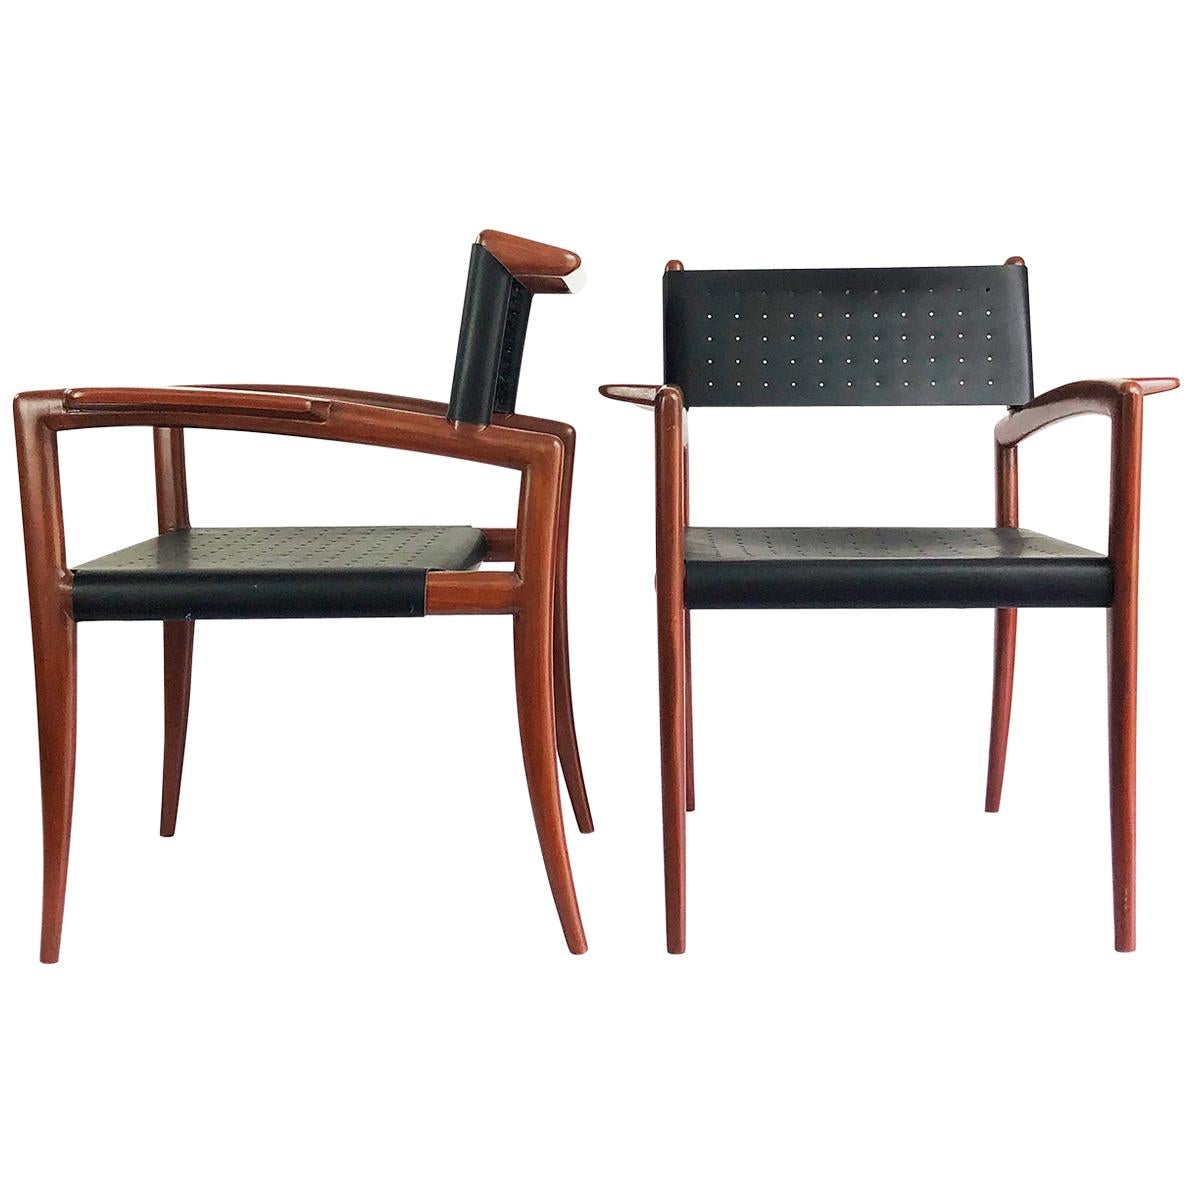 Extremely Hard to Find Pair of Klismos Chairs by Charles Allen